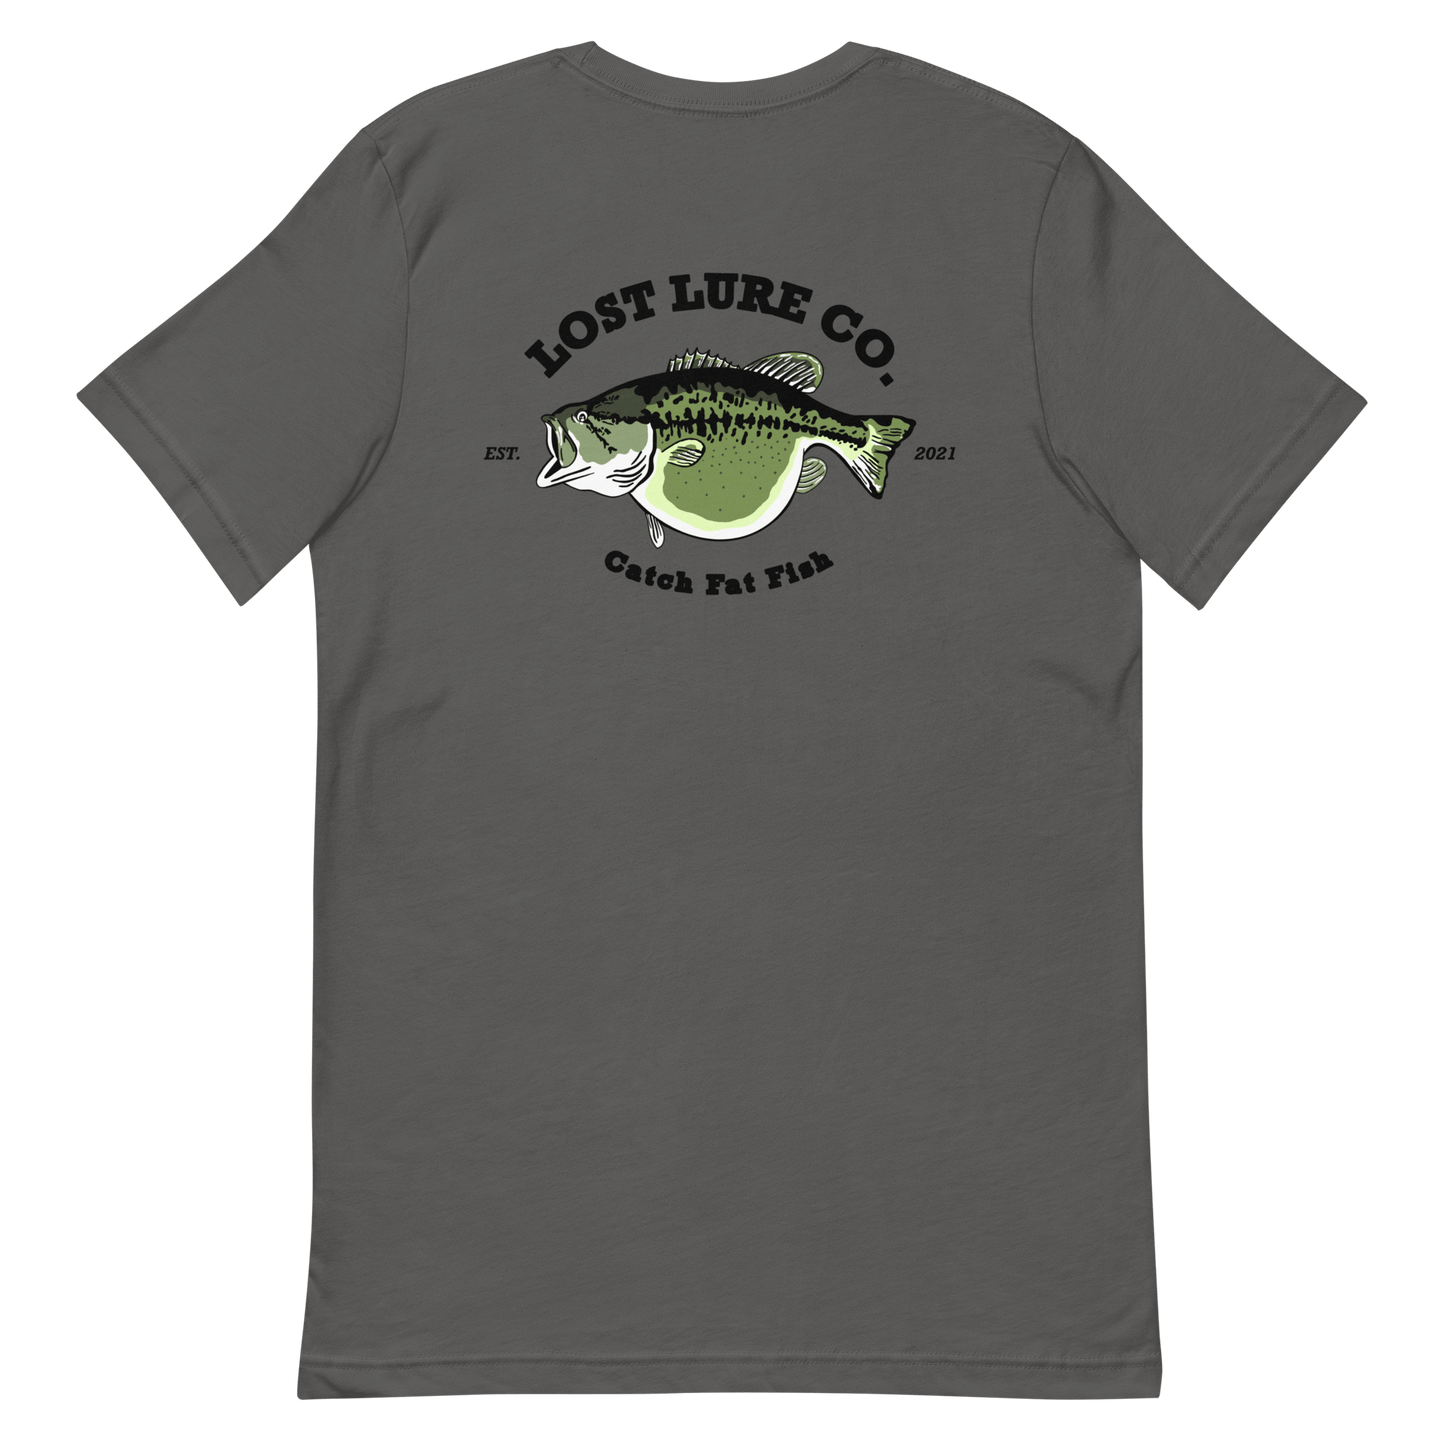 Bass fishing shirt. It has a drawing of a fat bass and it reads “lost lure co, catch fat fish”. The bass design is on the back, the lost lure logo is on the front. Gray shirt, back side